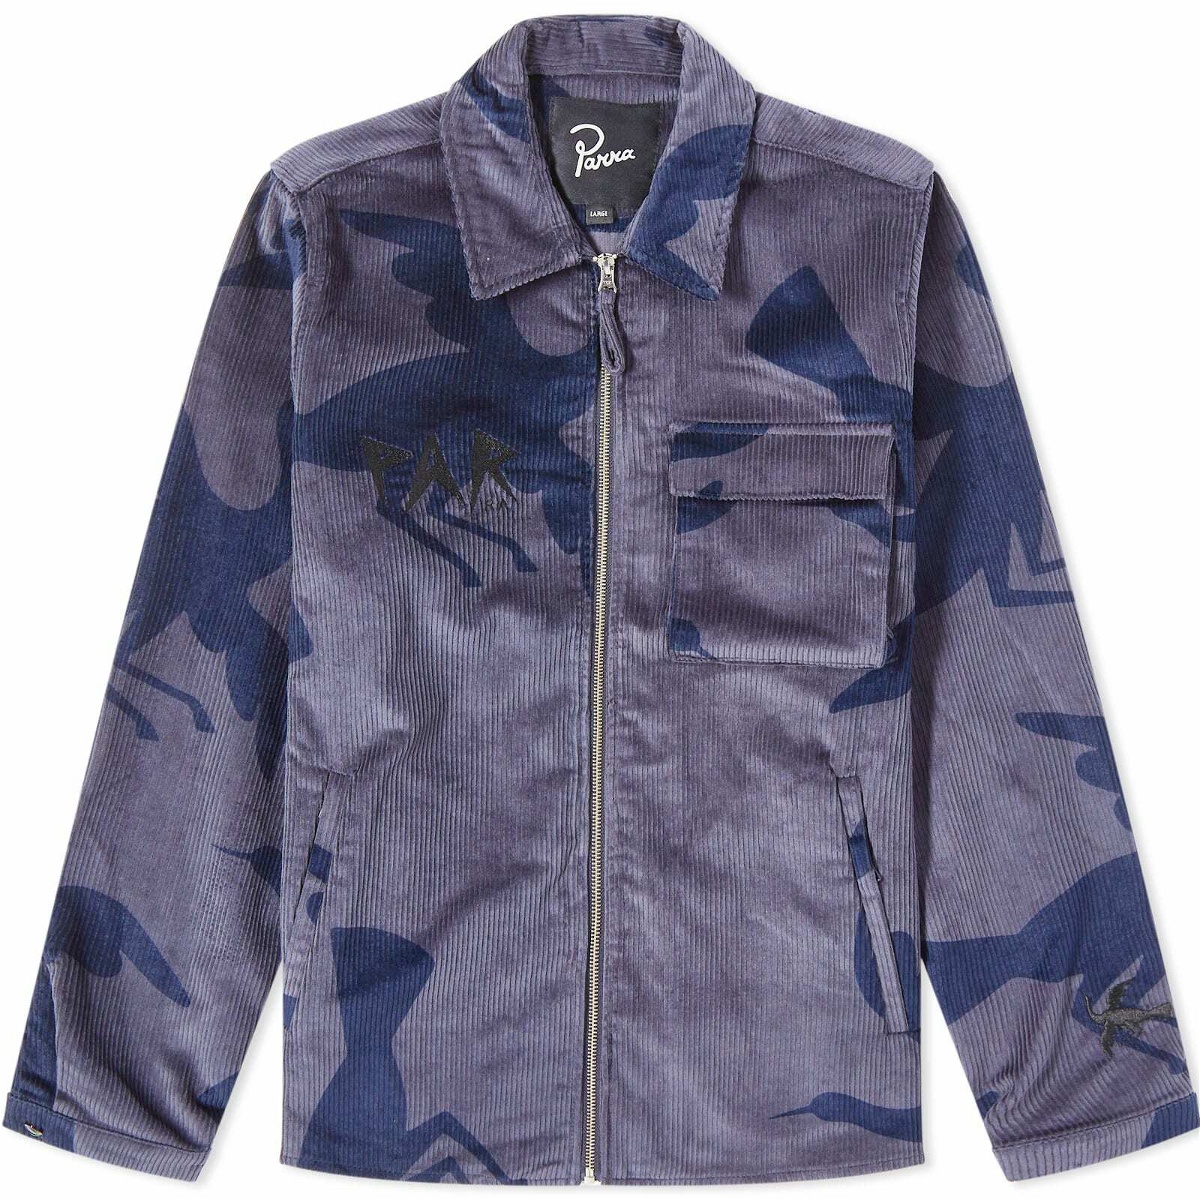 Photo: By Parra Men's Clipped Wings Corduroy Jacket in Greyish Blue